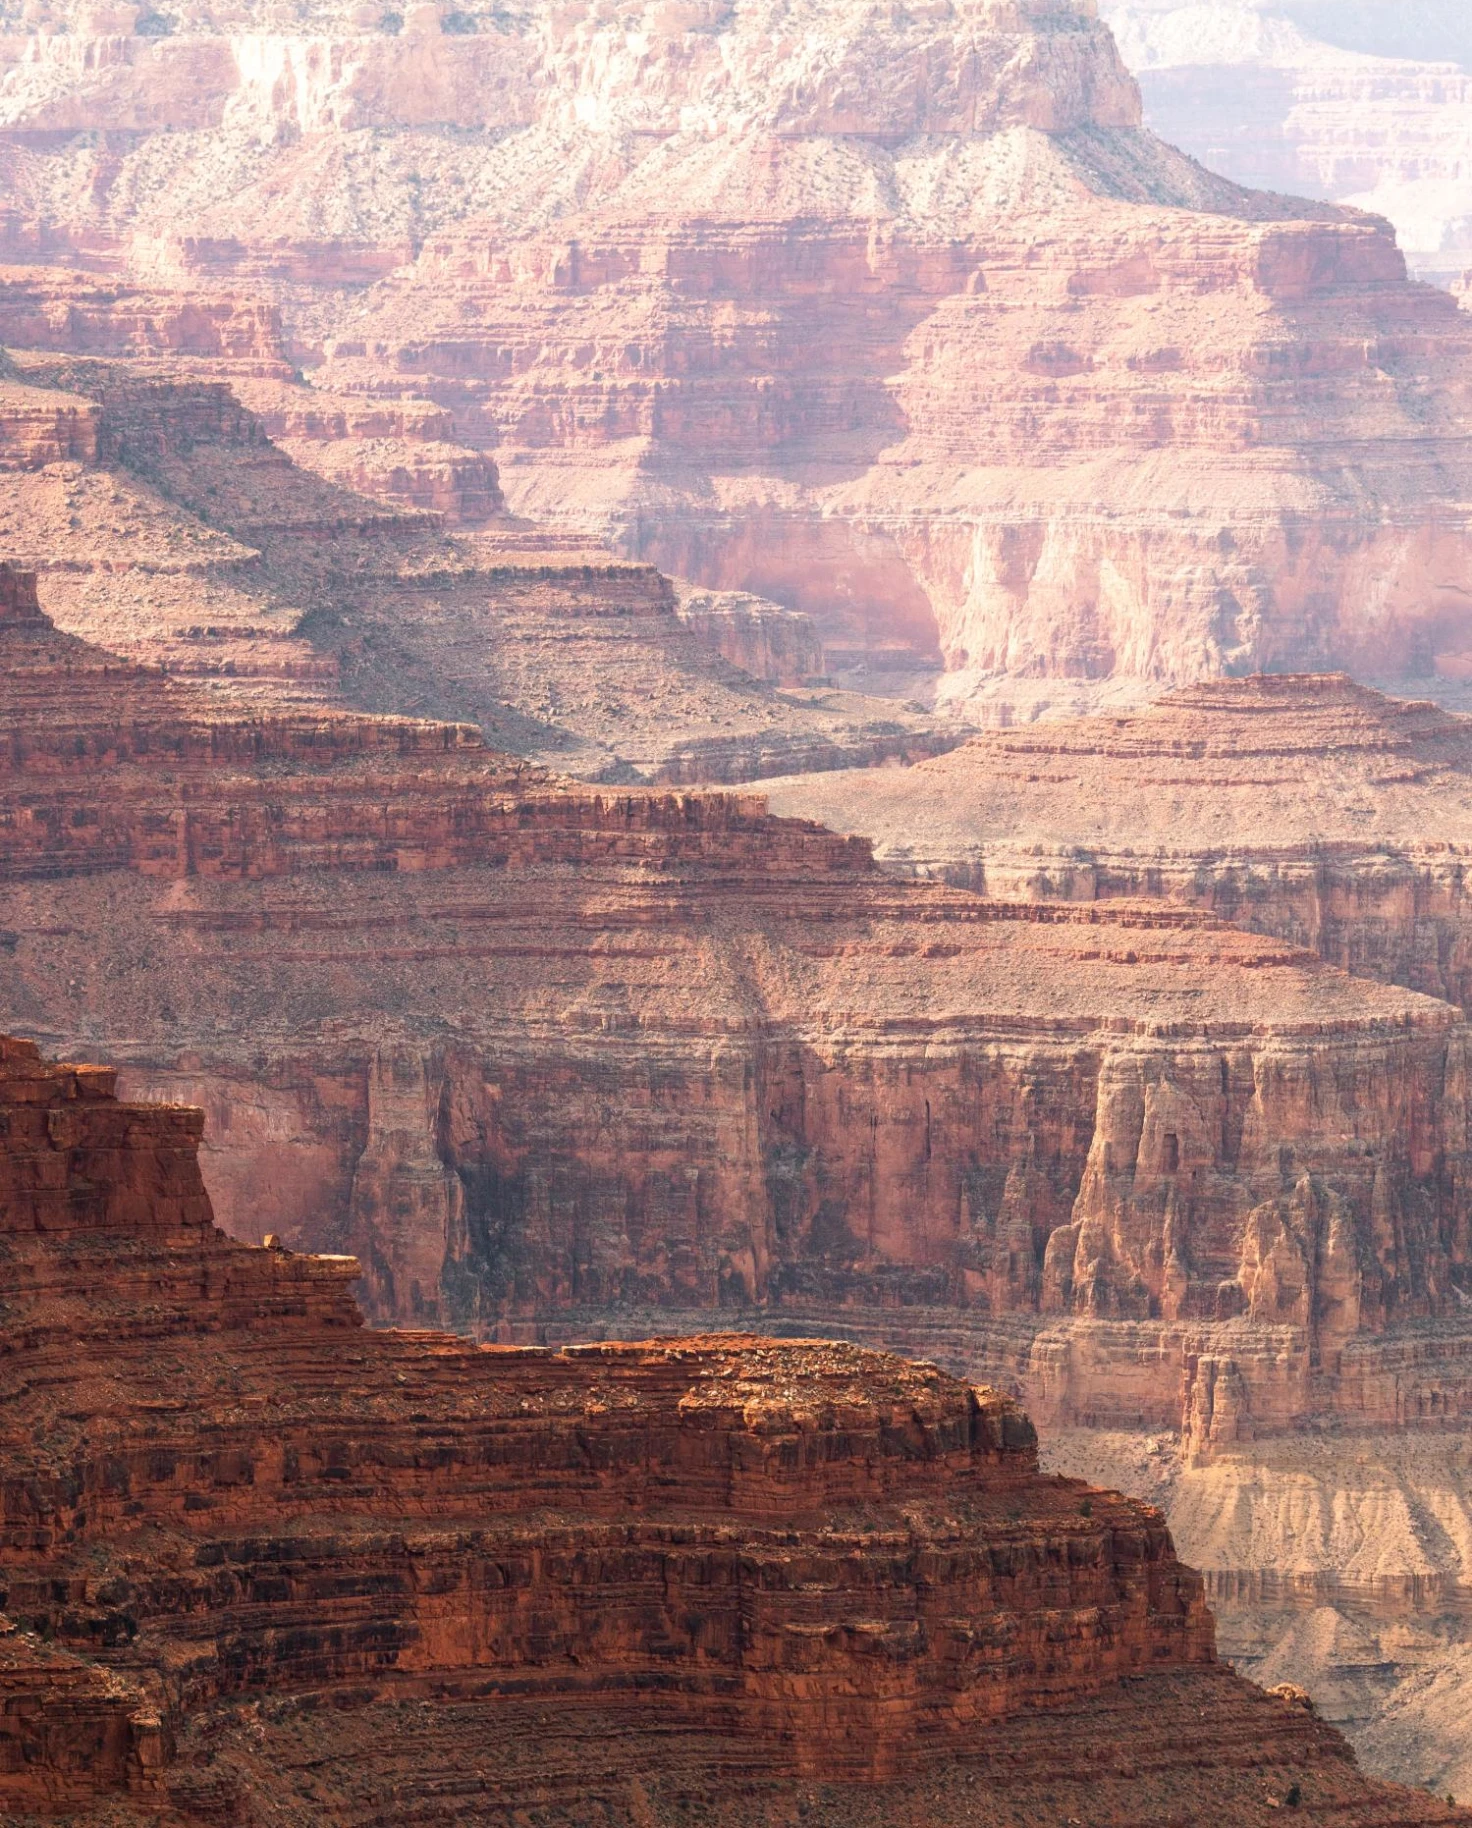 Endless layered rock formations in the Grand Canyon on a bright day. 